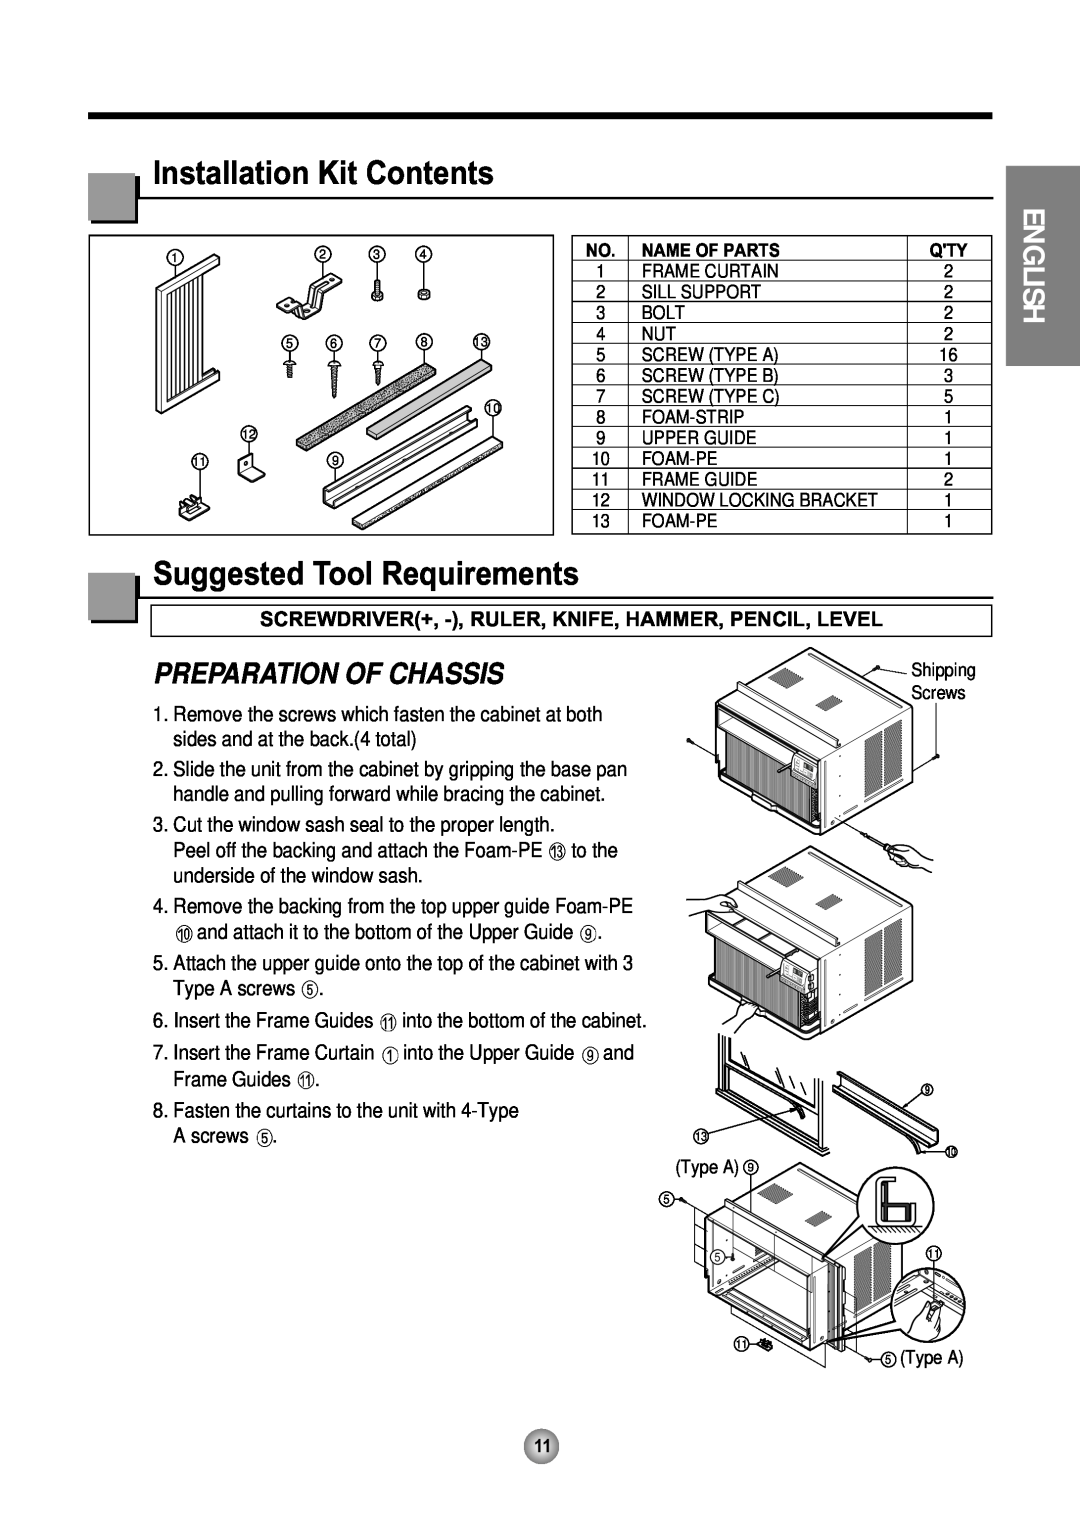 Friedrich CP08 operation manual Installation Kit Contents, Suggested Tool Requirements, English, Preparation Of Chassis 